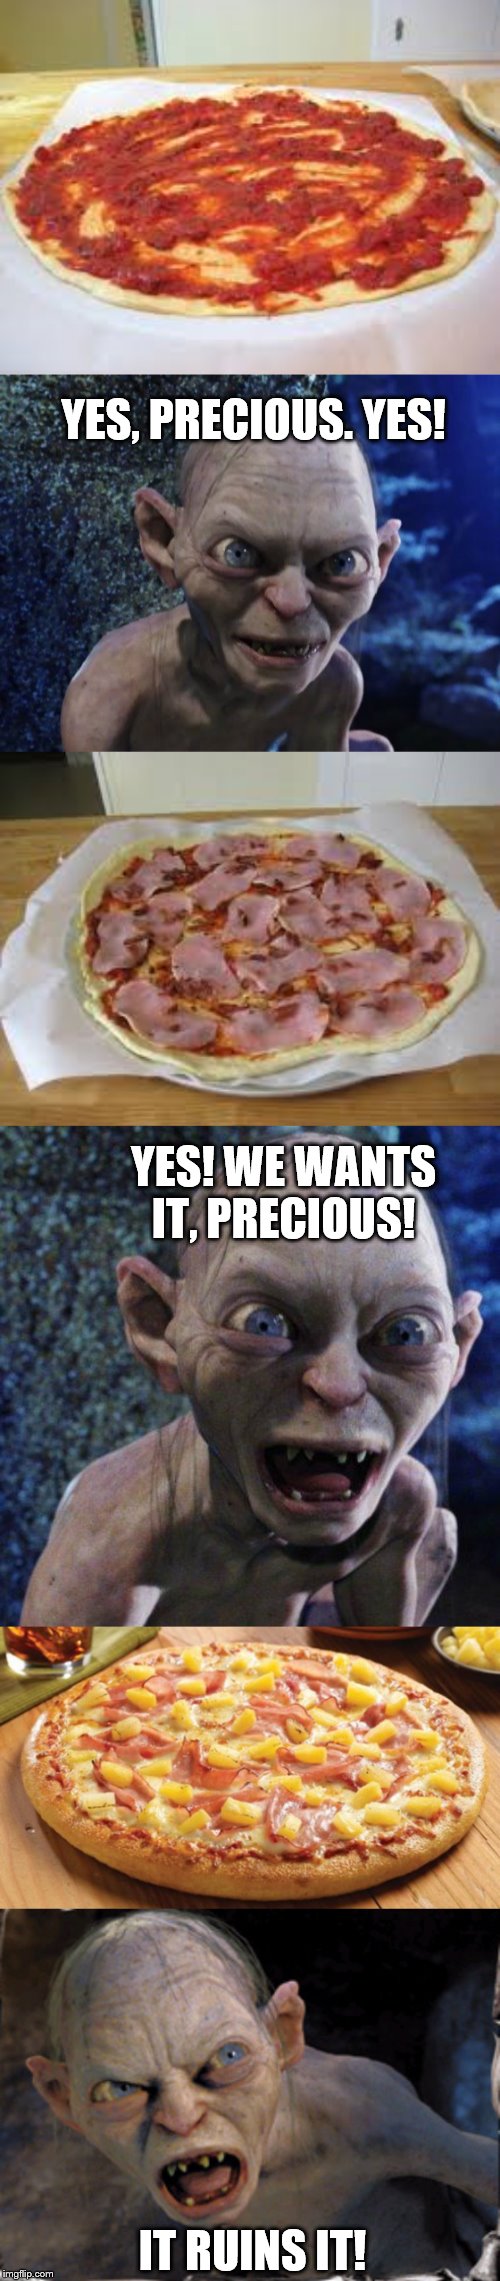 Looks like meat's back on the menu, boys! |  YES, PRECIOUS. YES! YES! WE WANTS IT, PRECIOUS! IT RUINS IT! | image tagged in gollum,memes,pineapple pizza | made w/ Imgflip meme maker